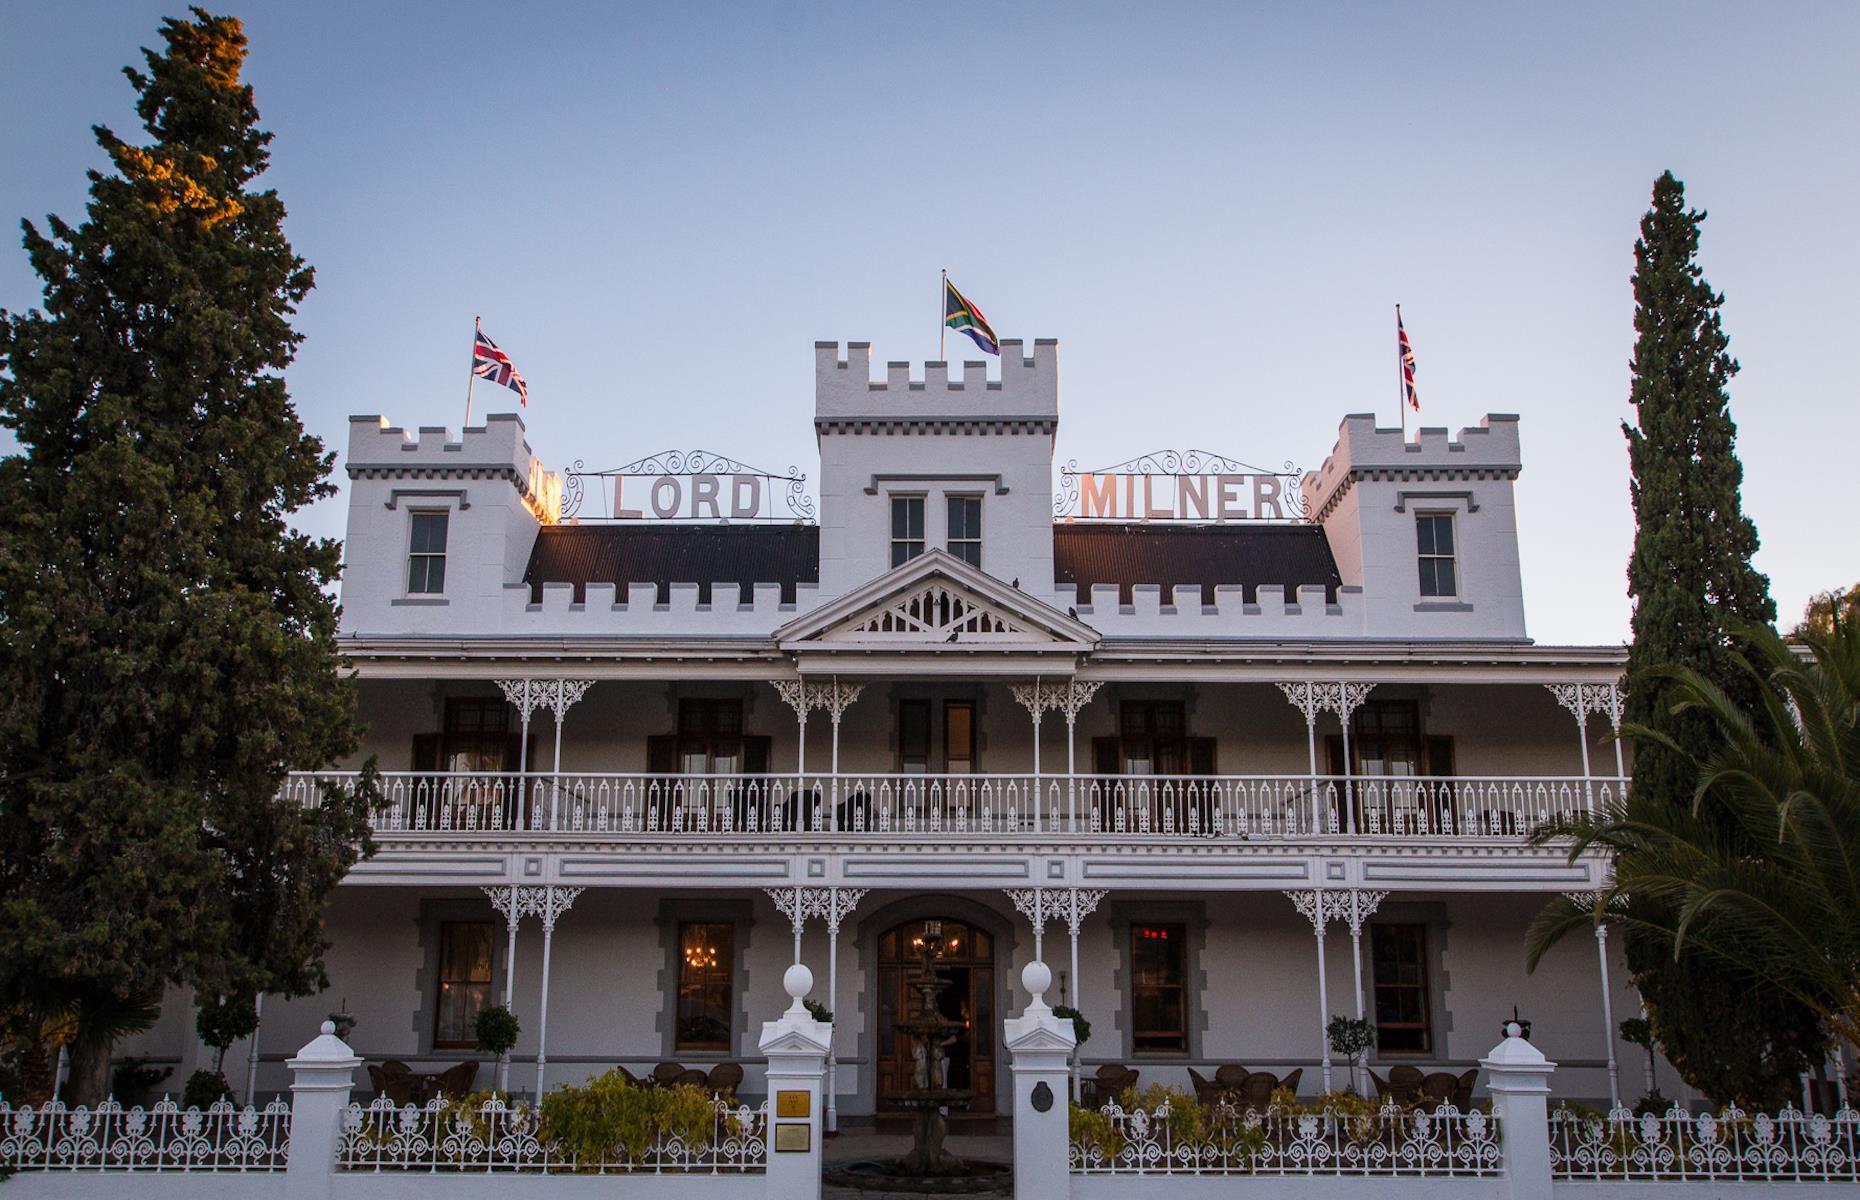 <p><a href="https://www.matjiesfontein.com/rooms/the-lord-milner-hotel/">This 19th-century hotel</a> has a lot going for it: views of South Africa's rugged Karoo region, old-world rooms and a history including a stint as the headquarters of the Cape Western Command during the Anglo-Boer War. One soul from this era apparently still lingers in the hotel. A nurse, Kate, who died mysteriously when she was just 19, is said to haunt a little turret room in the hotel: visitors report feeling a strange presence and hearing peculiar noises.</p>